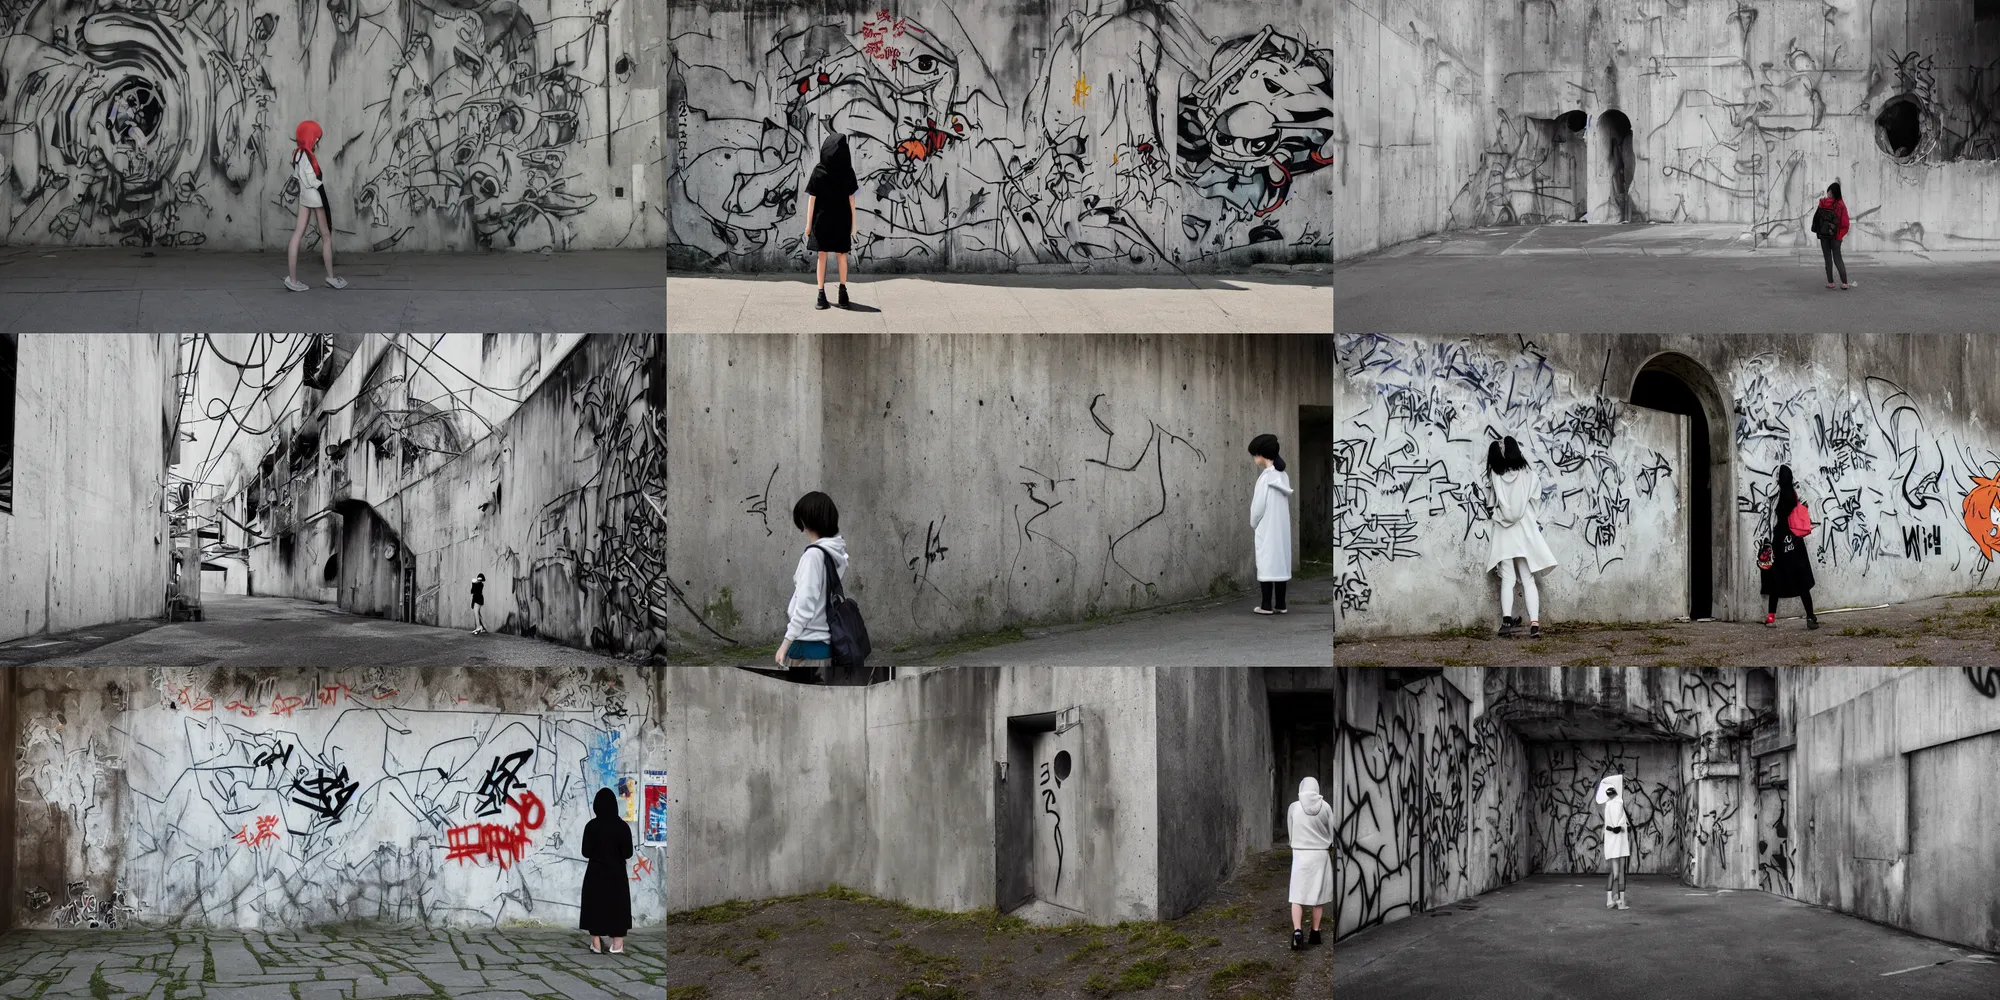 Prompt: ghibli, miyazaki movie scene, vanishing point, focal point, ultra wide, brutalist, white hoodie girl outside a large dark hole in the side of a concrete wall, overexposed, dappled light, sunlight, long dark shadows, black depths, posters, notices, graffiti, banners, junk, overgrown, spiderwebs